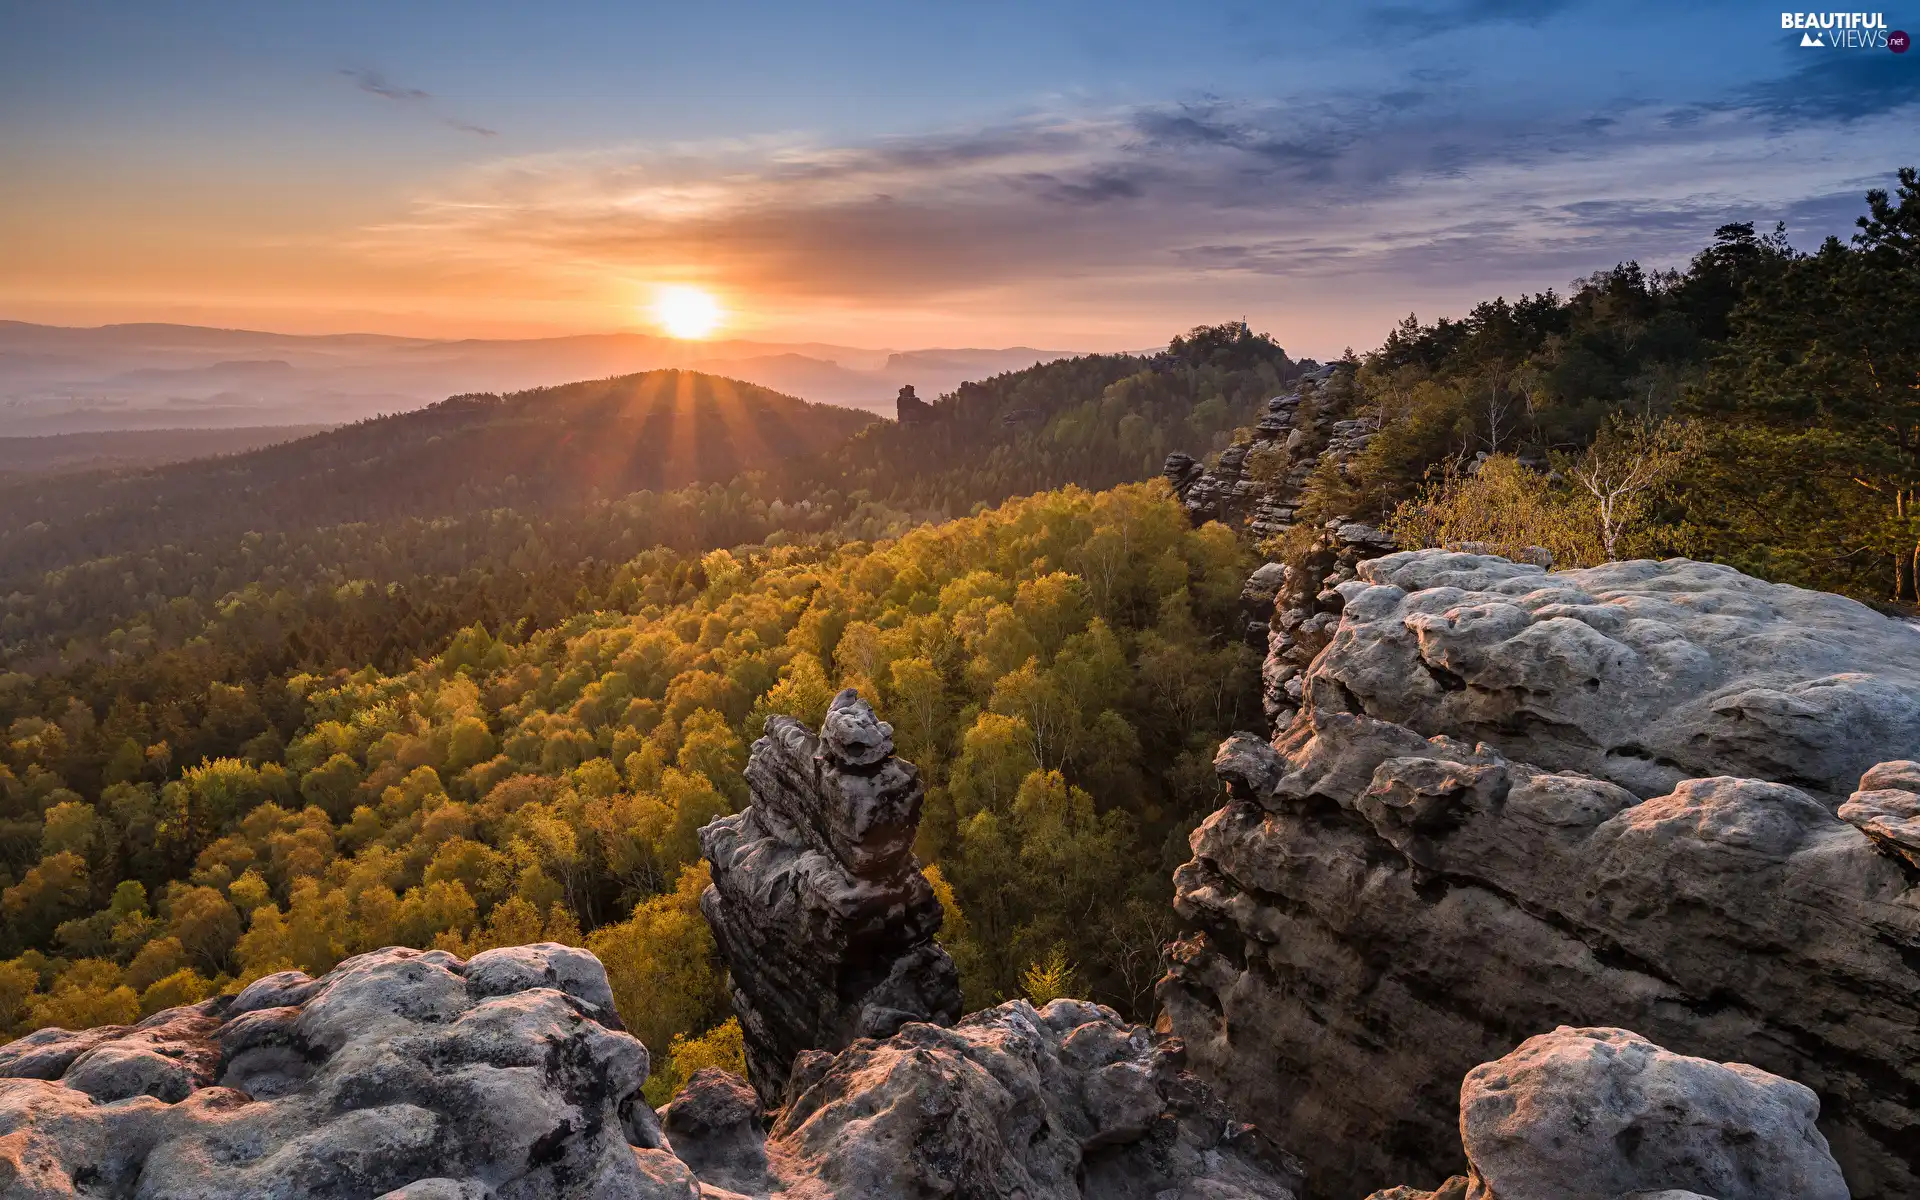 rocks, trees, Great Sunsets, viewes, forest, Fog, Mountains